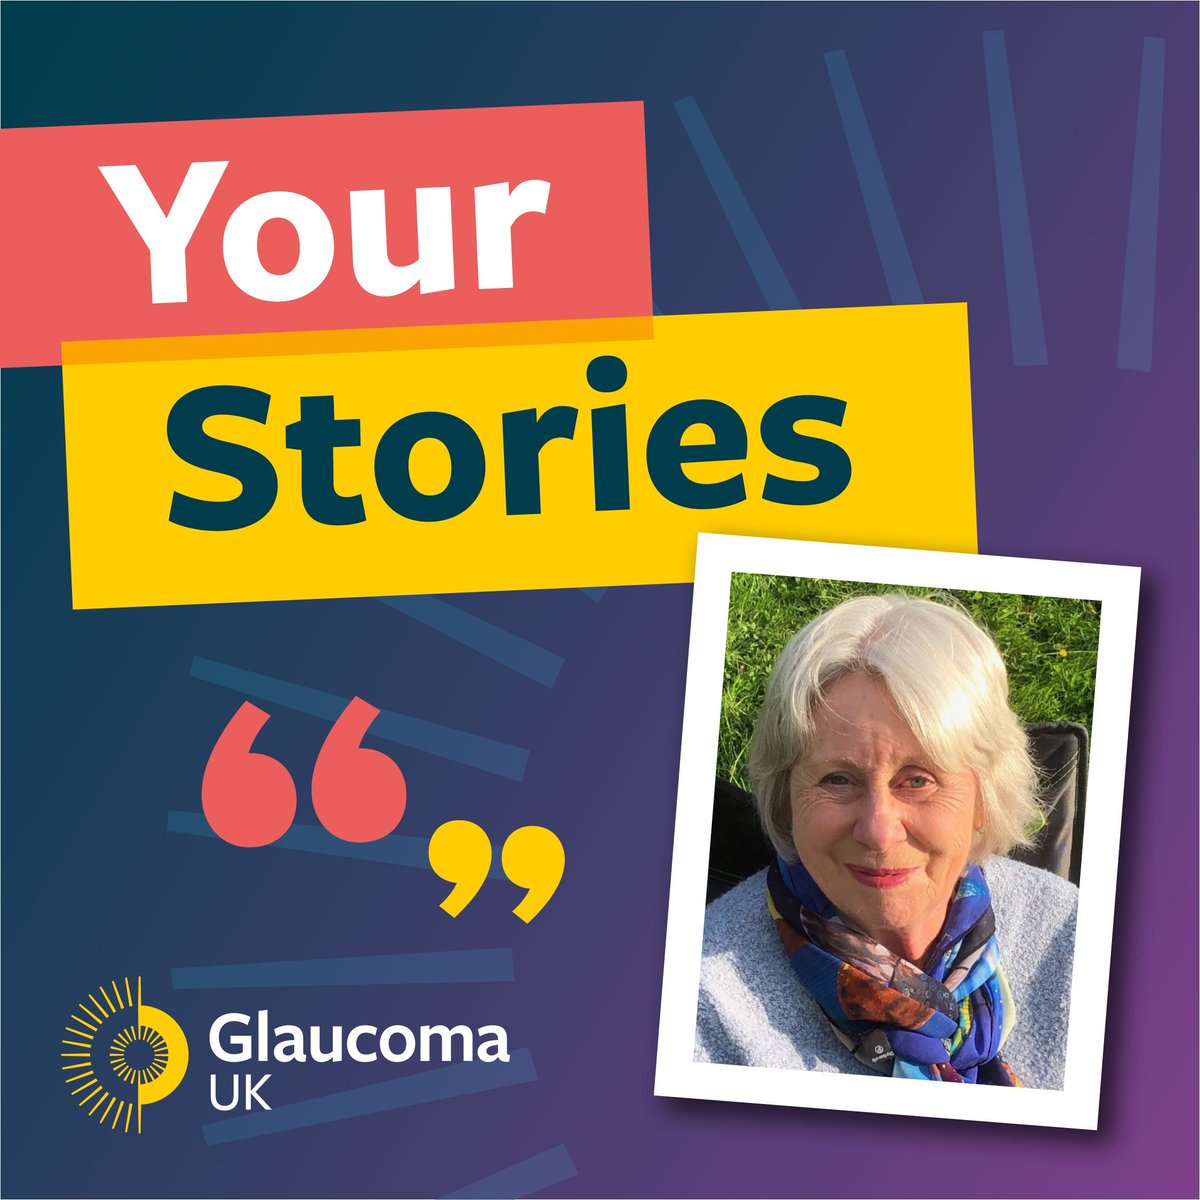 Margaret was in her thirties when she was diagnosed with glaucoma. Specialists at the time believed she was too young to develop the disease. Read more about here story and experiences of living with glaucoma here: buff.ly/3TNEDTo